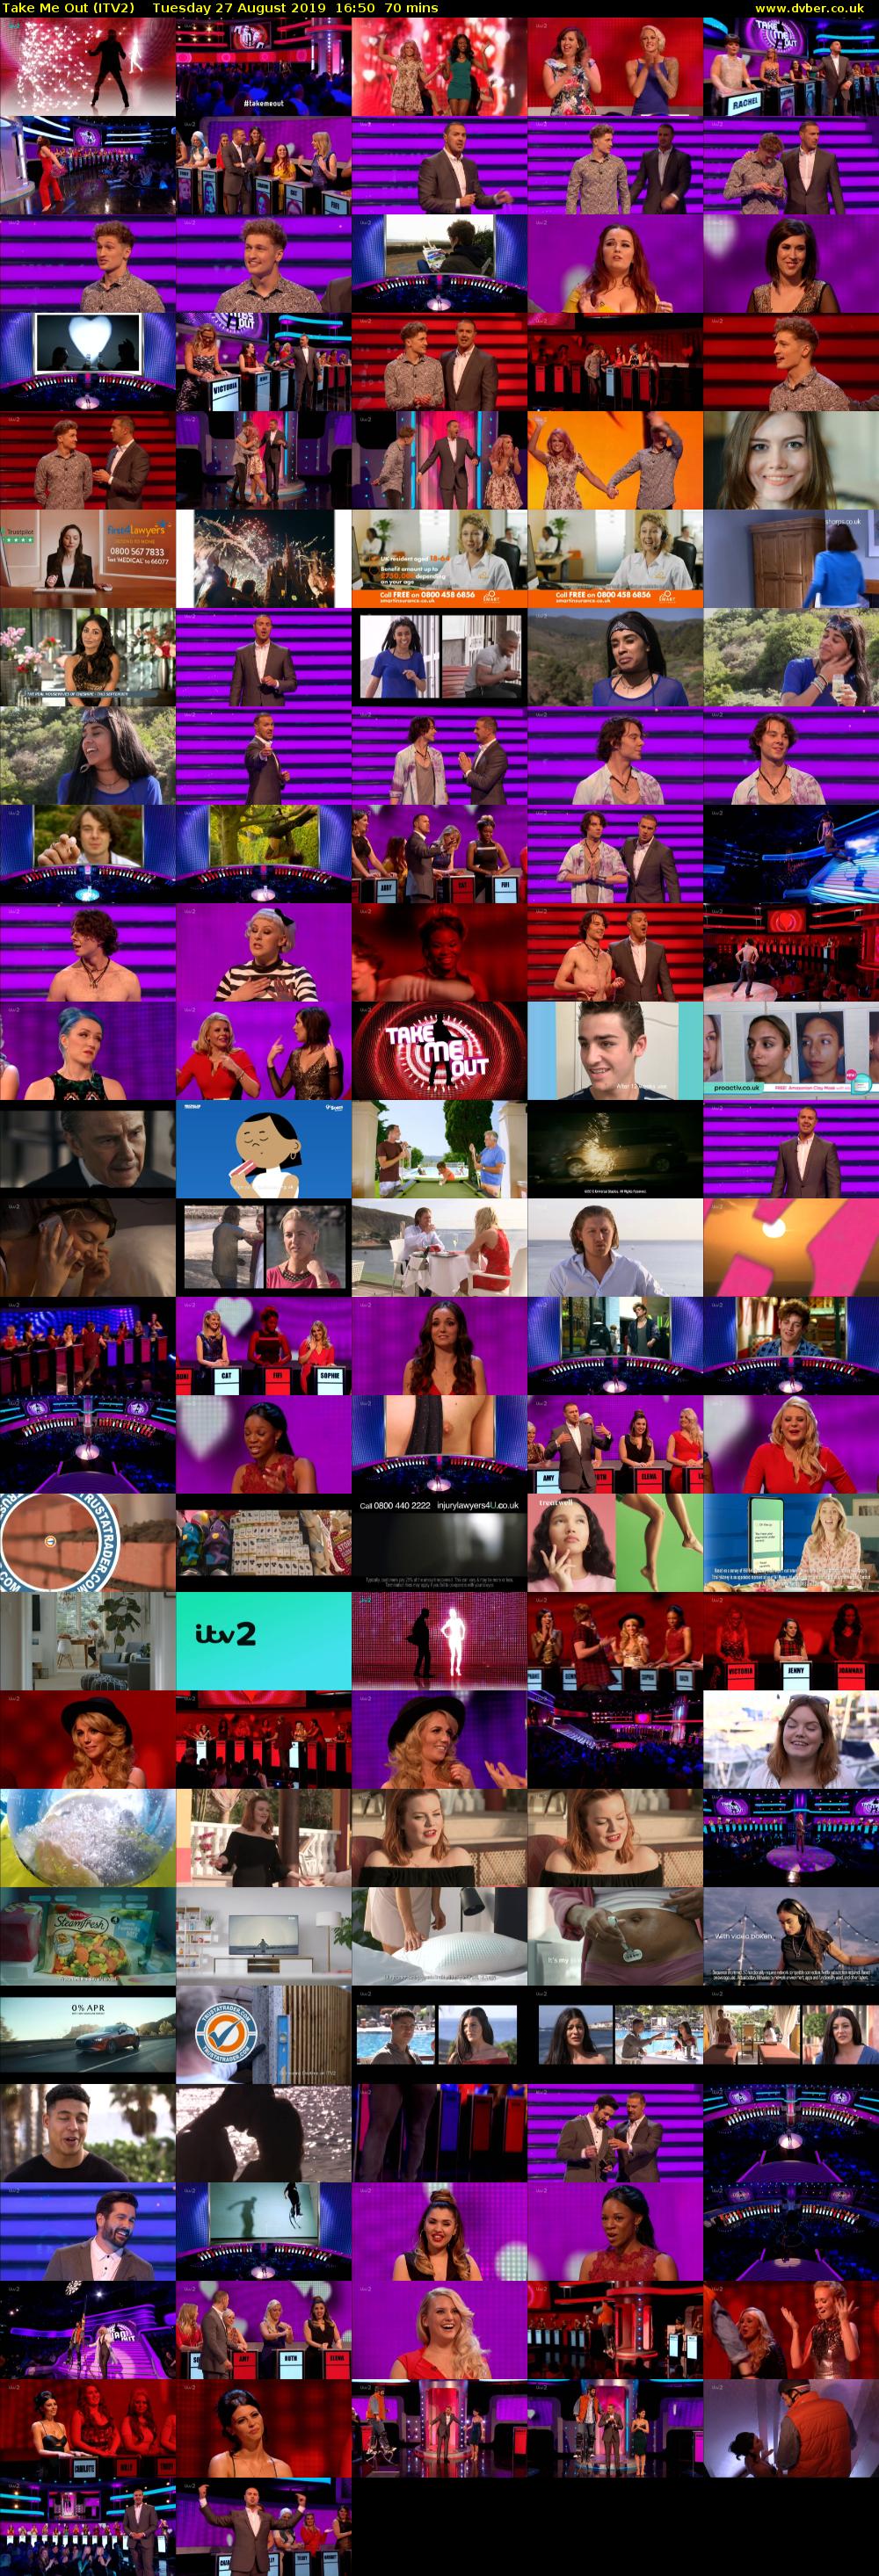 Take Me Out (ITV2) Tuesday 27 August 2019 16:50 - 18:00